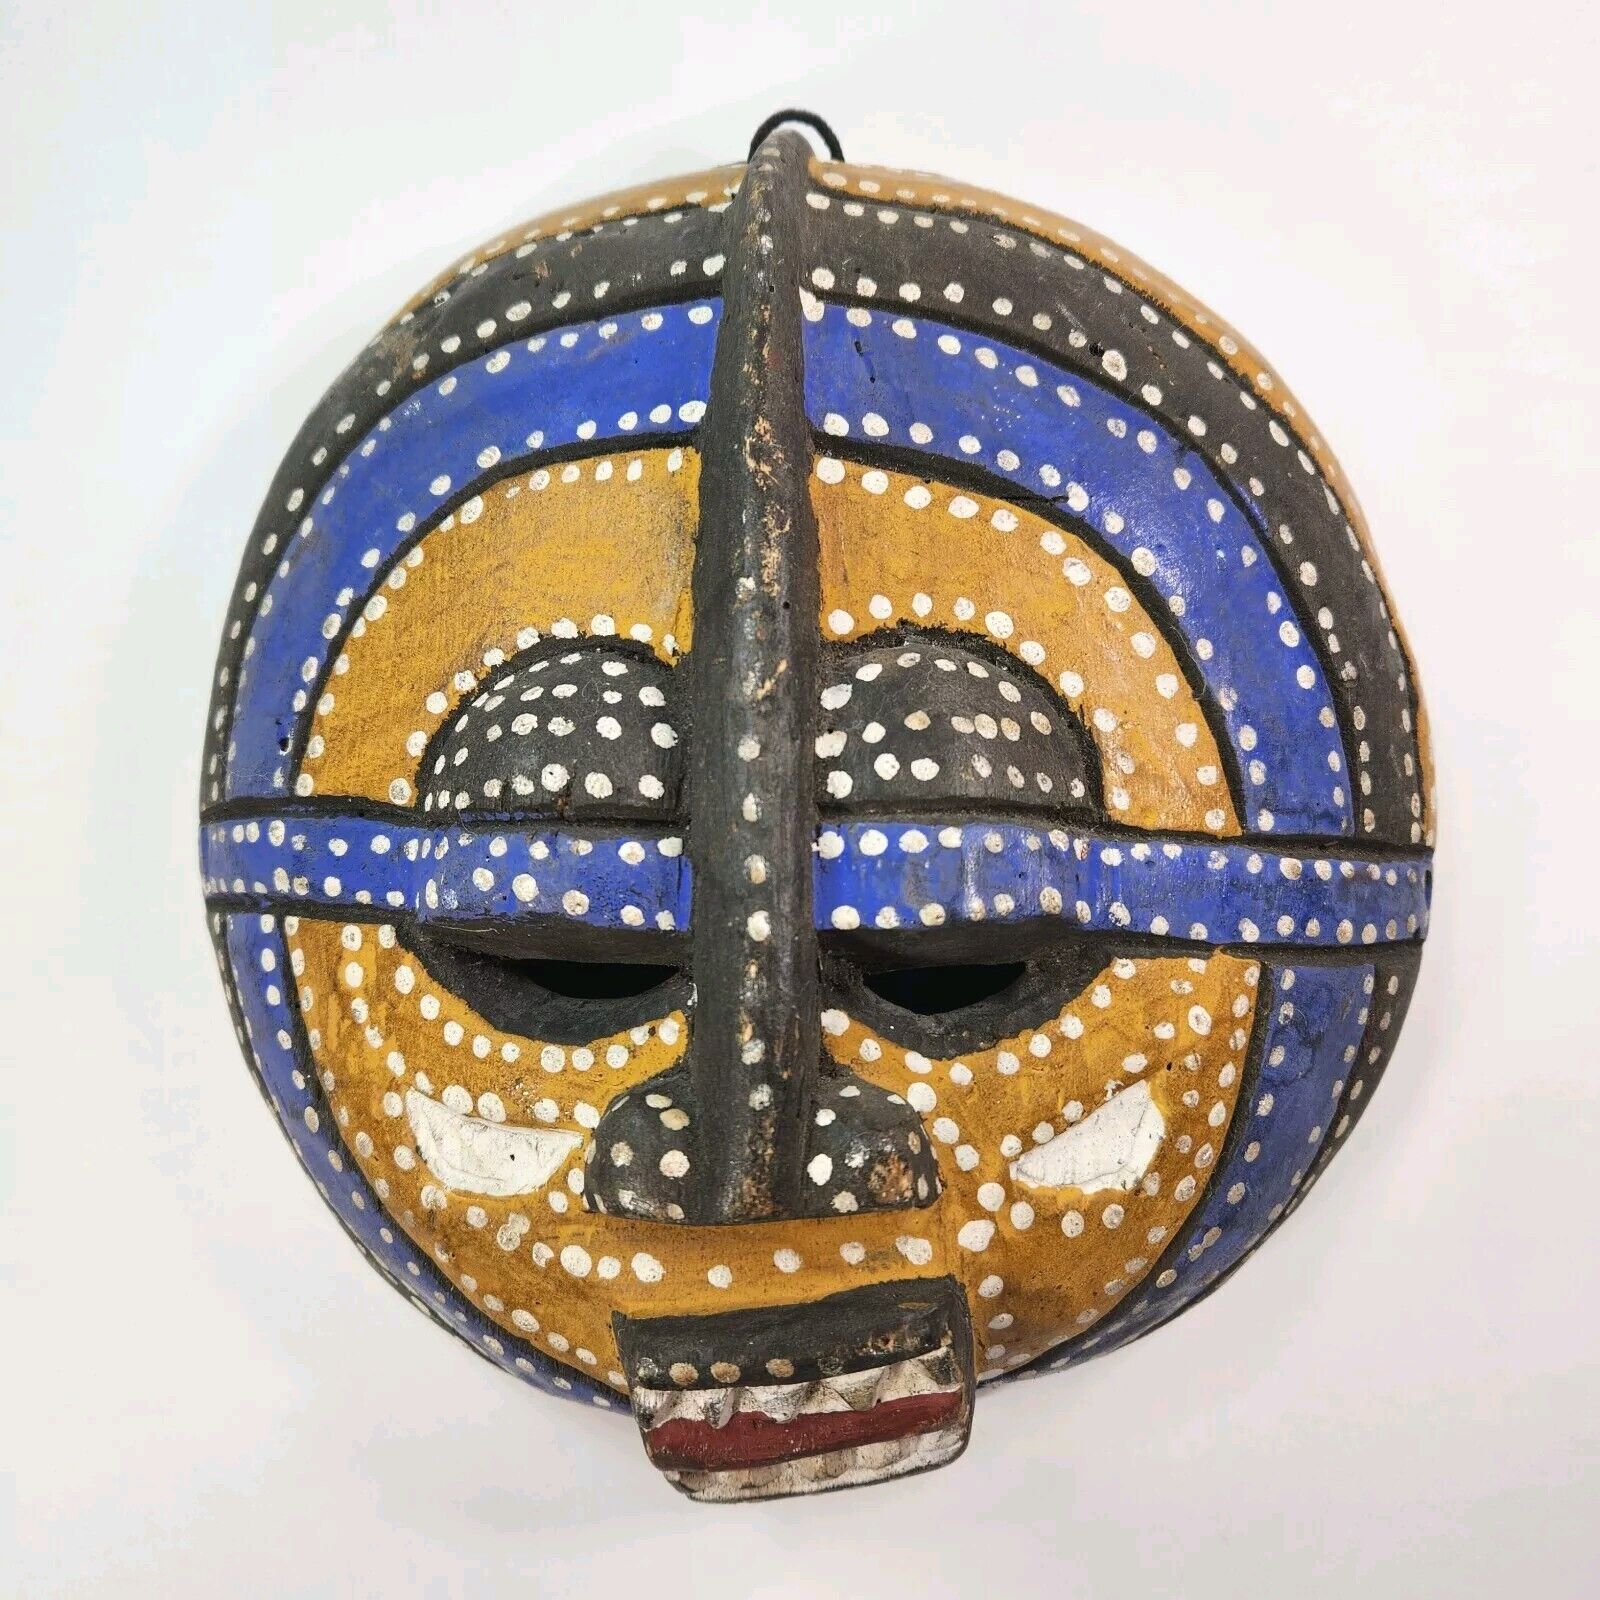 Baluba West Africa Moon Mask Pier 1 Ivory Coast Collection